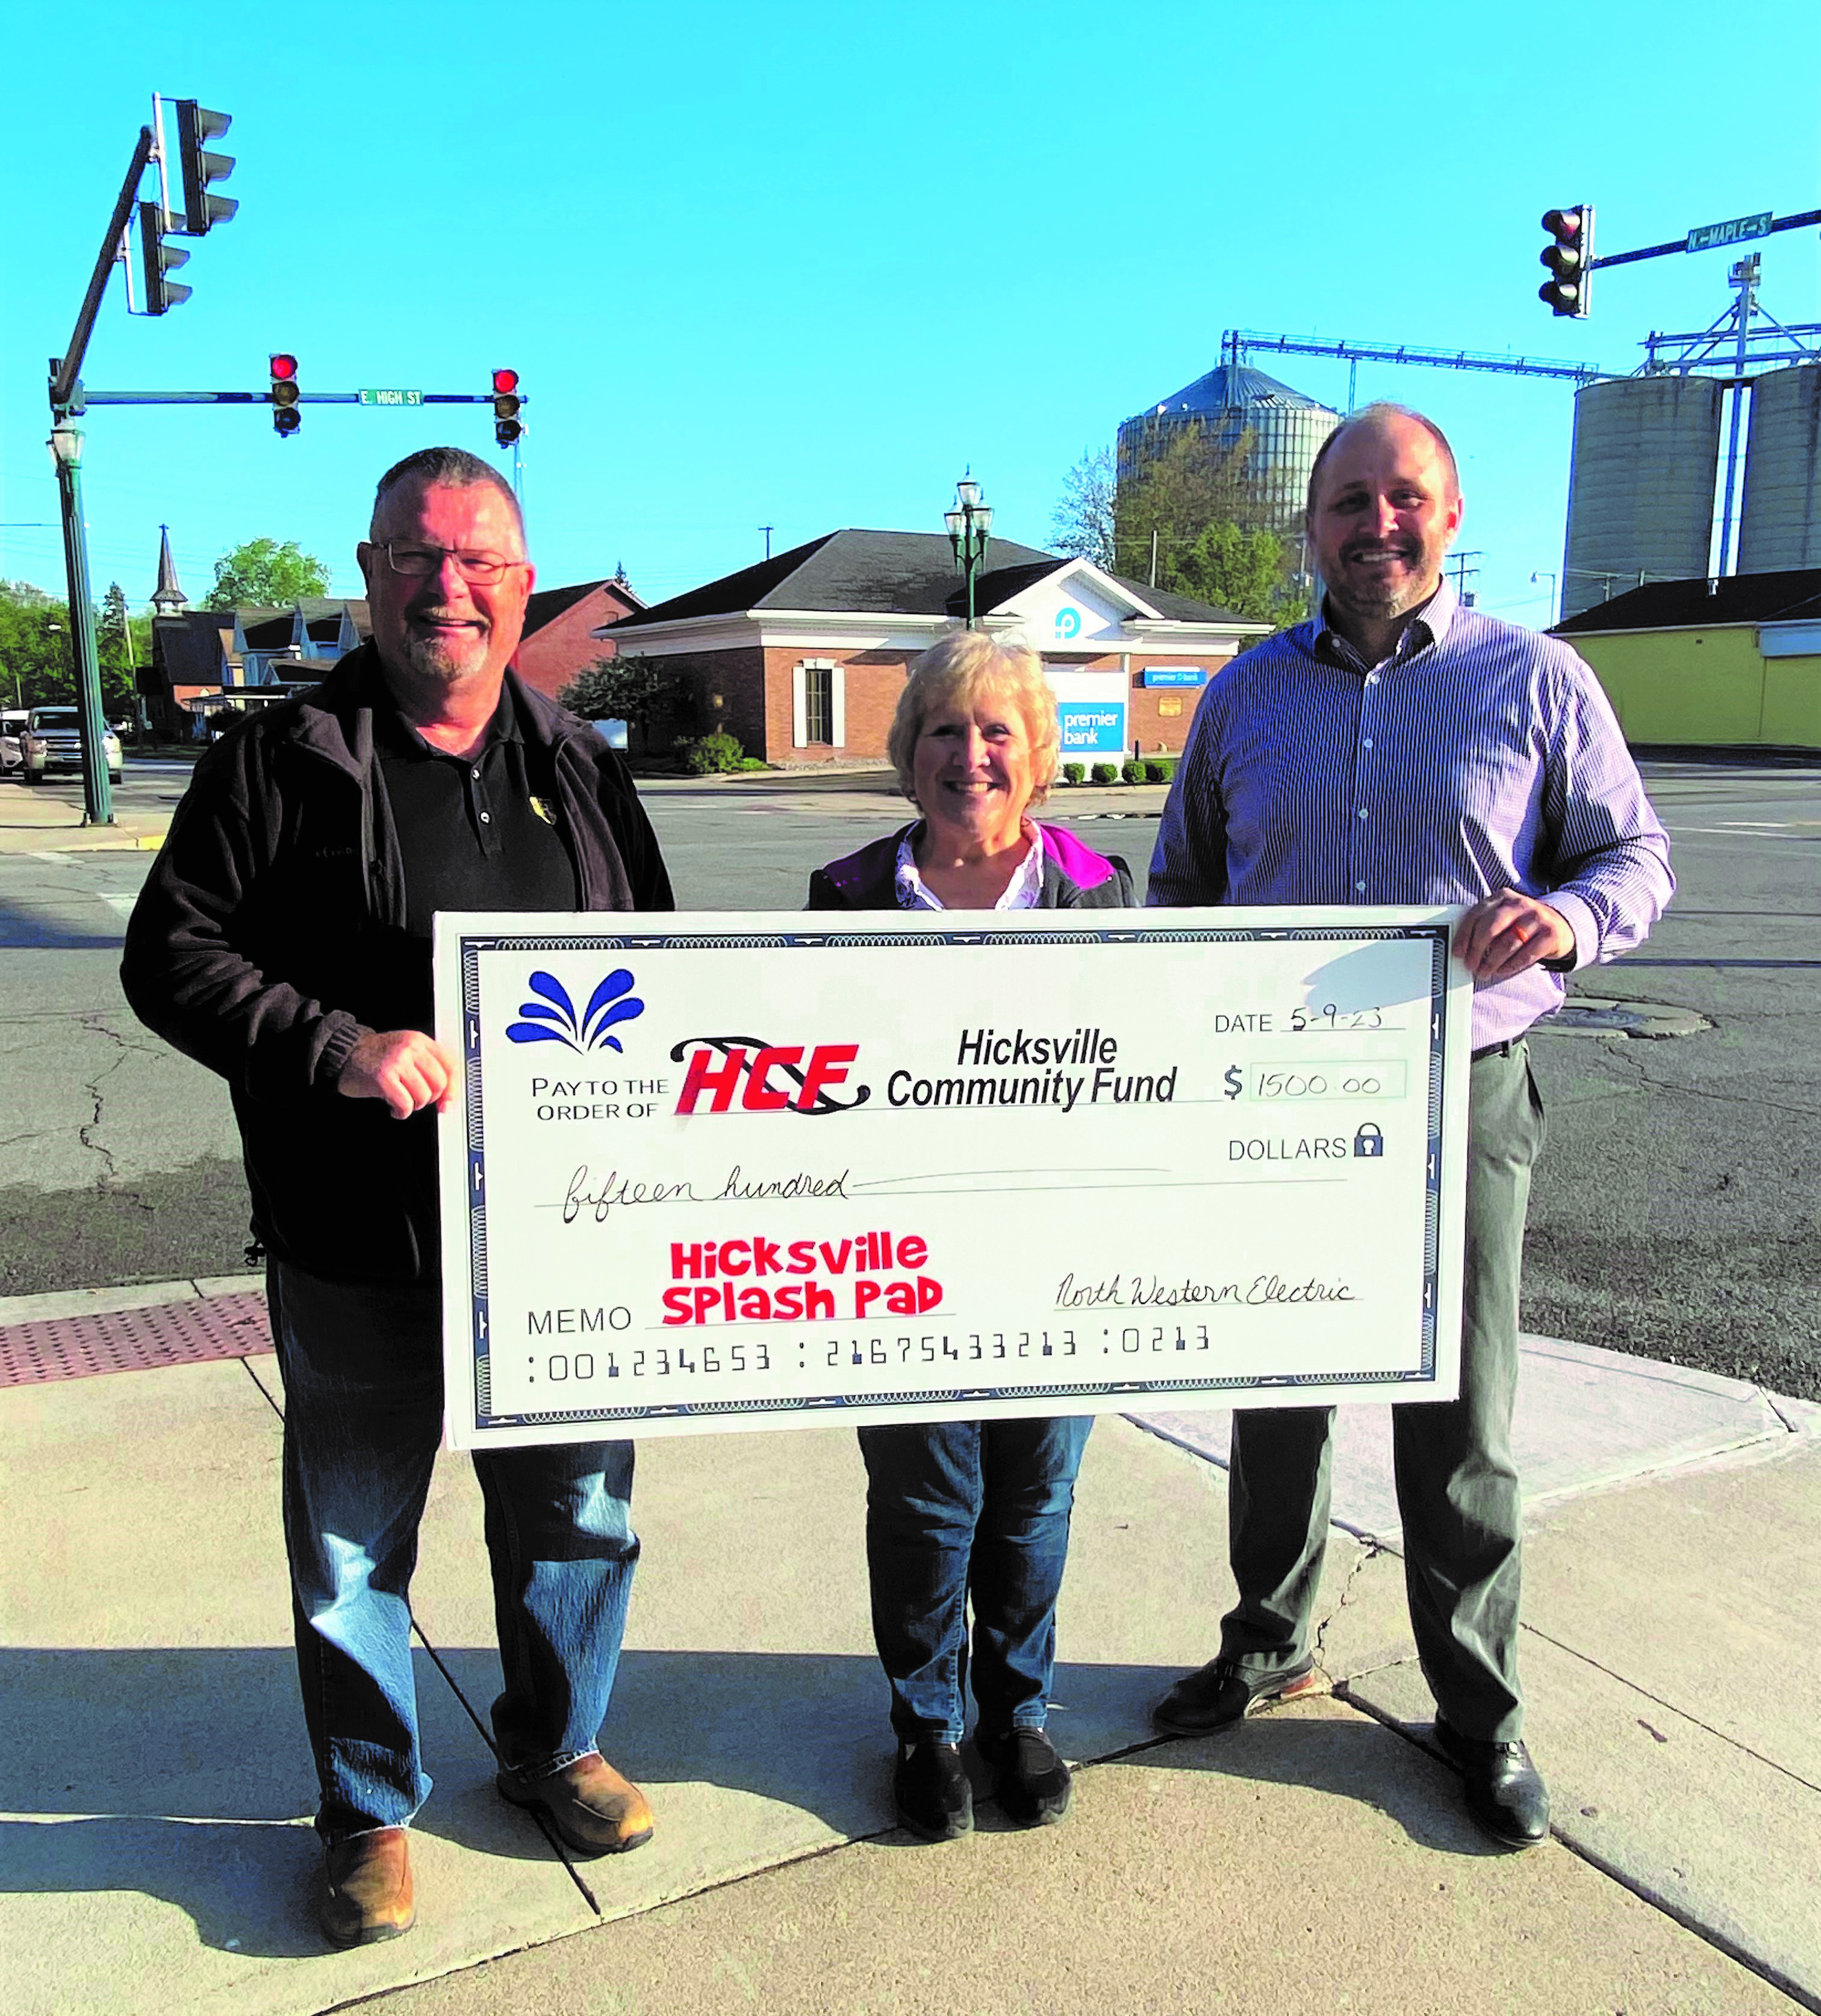 TWO MEN AND ONE LADY HOLDING A BIG CHECK WHILE STANDING ON SIDEWALK